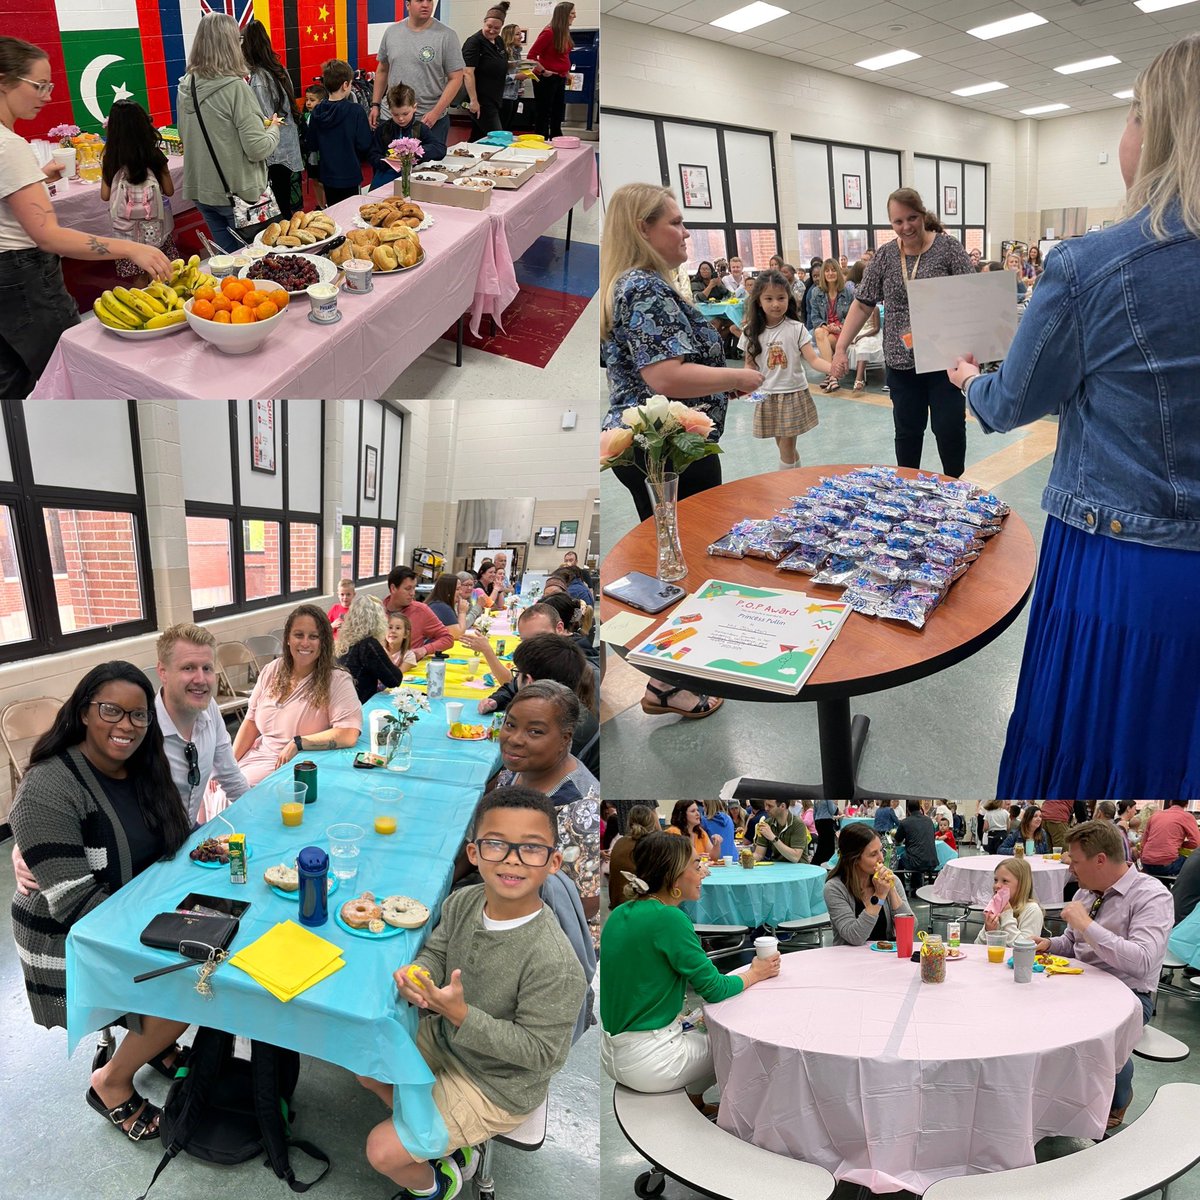 This morning’s first annual POP (Proud of Your Progress) Awards were a true celebration of perseverance! 🏆 We honored our hardworking students, sharing a special treat—a pop tart for their “POP” awards! 🎉 Here’s to all the bright futures ahead! 🌟 #HopewellHeroes #WEareLakota